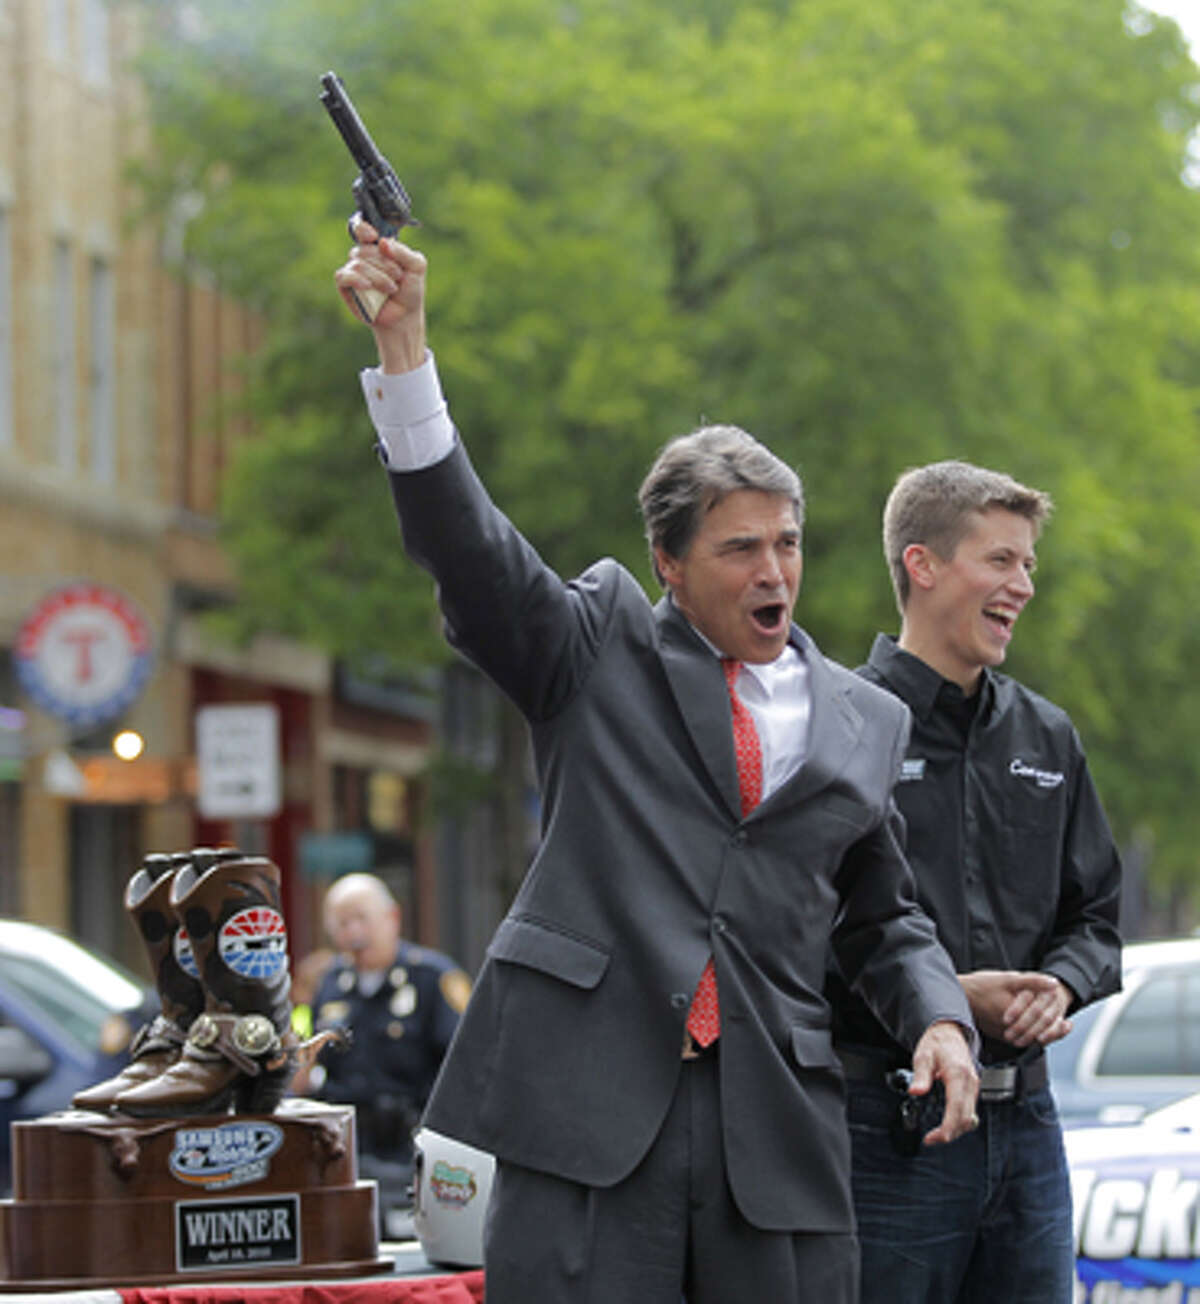 In this April 15, 2010 file photo, Texas Gov. Rick Perry fires a six shooter filled with blanks as NASCAR driver Colin Braun looks on at an event in downtown Fort Worth, Texas.